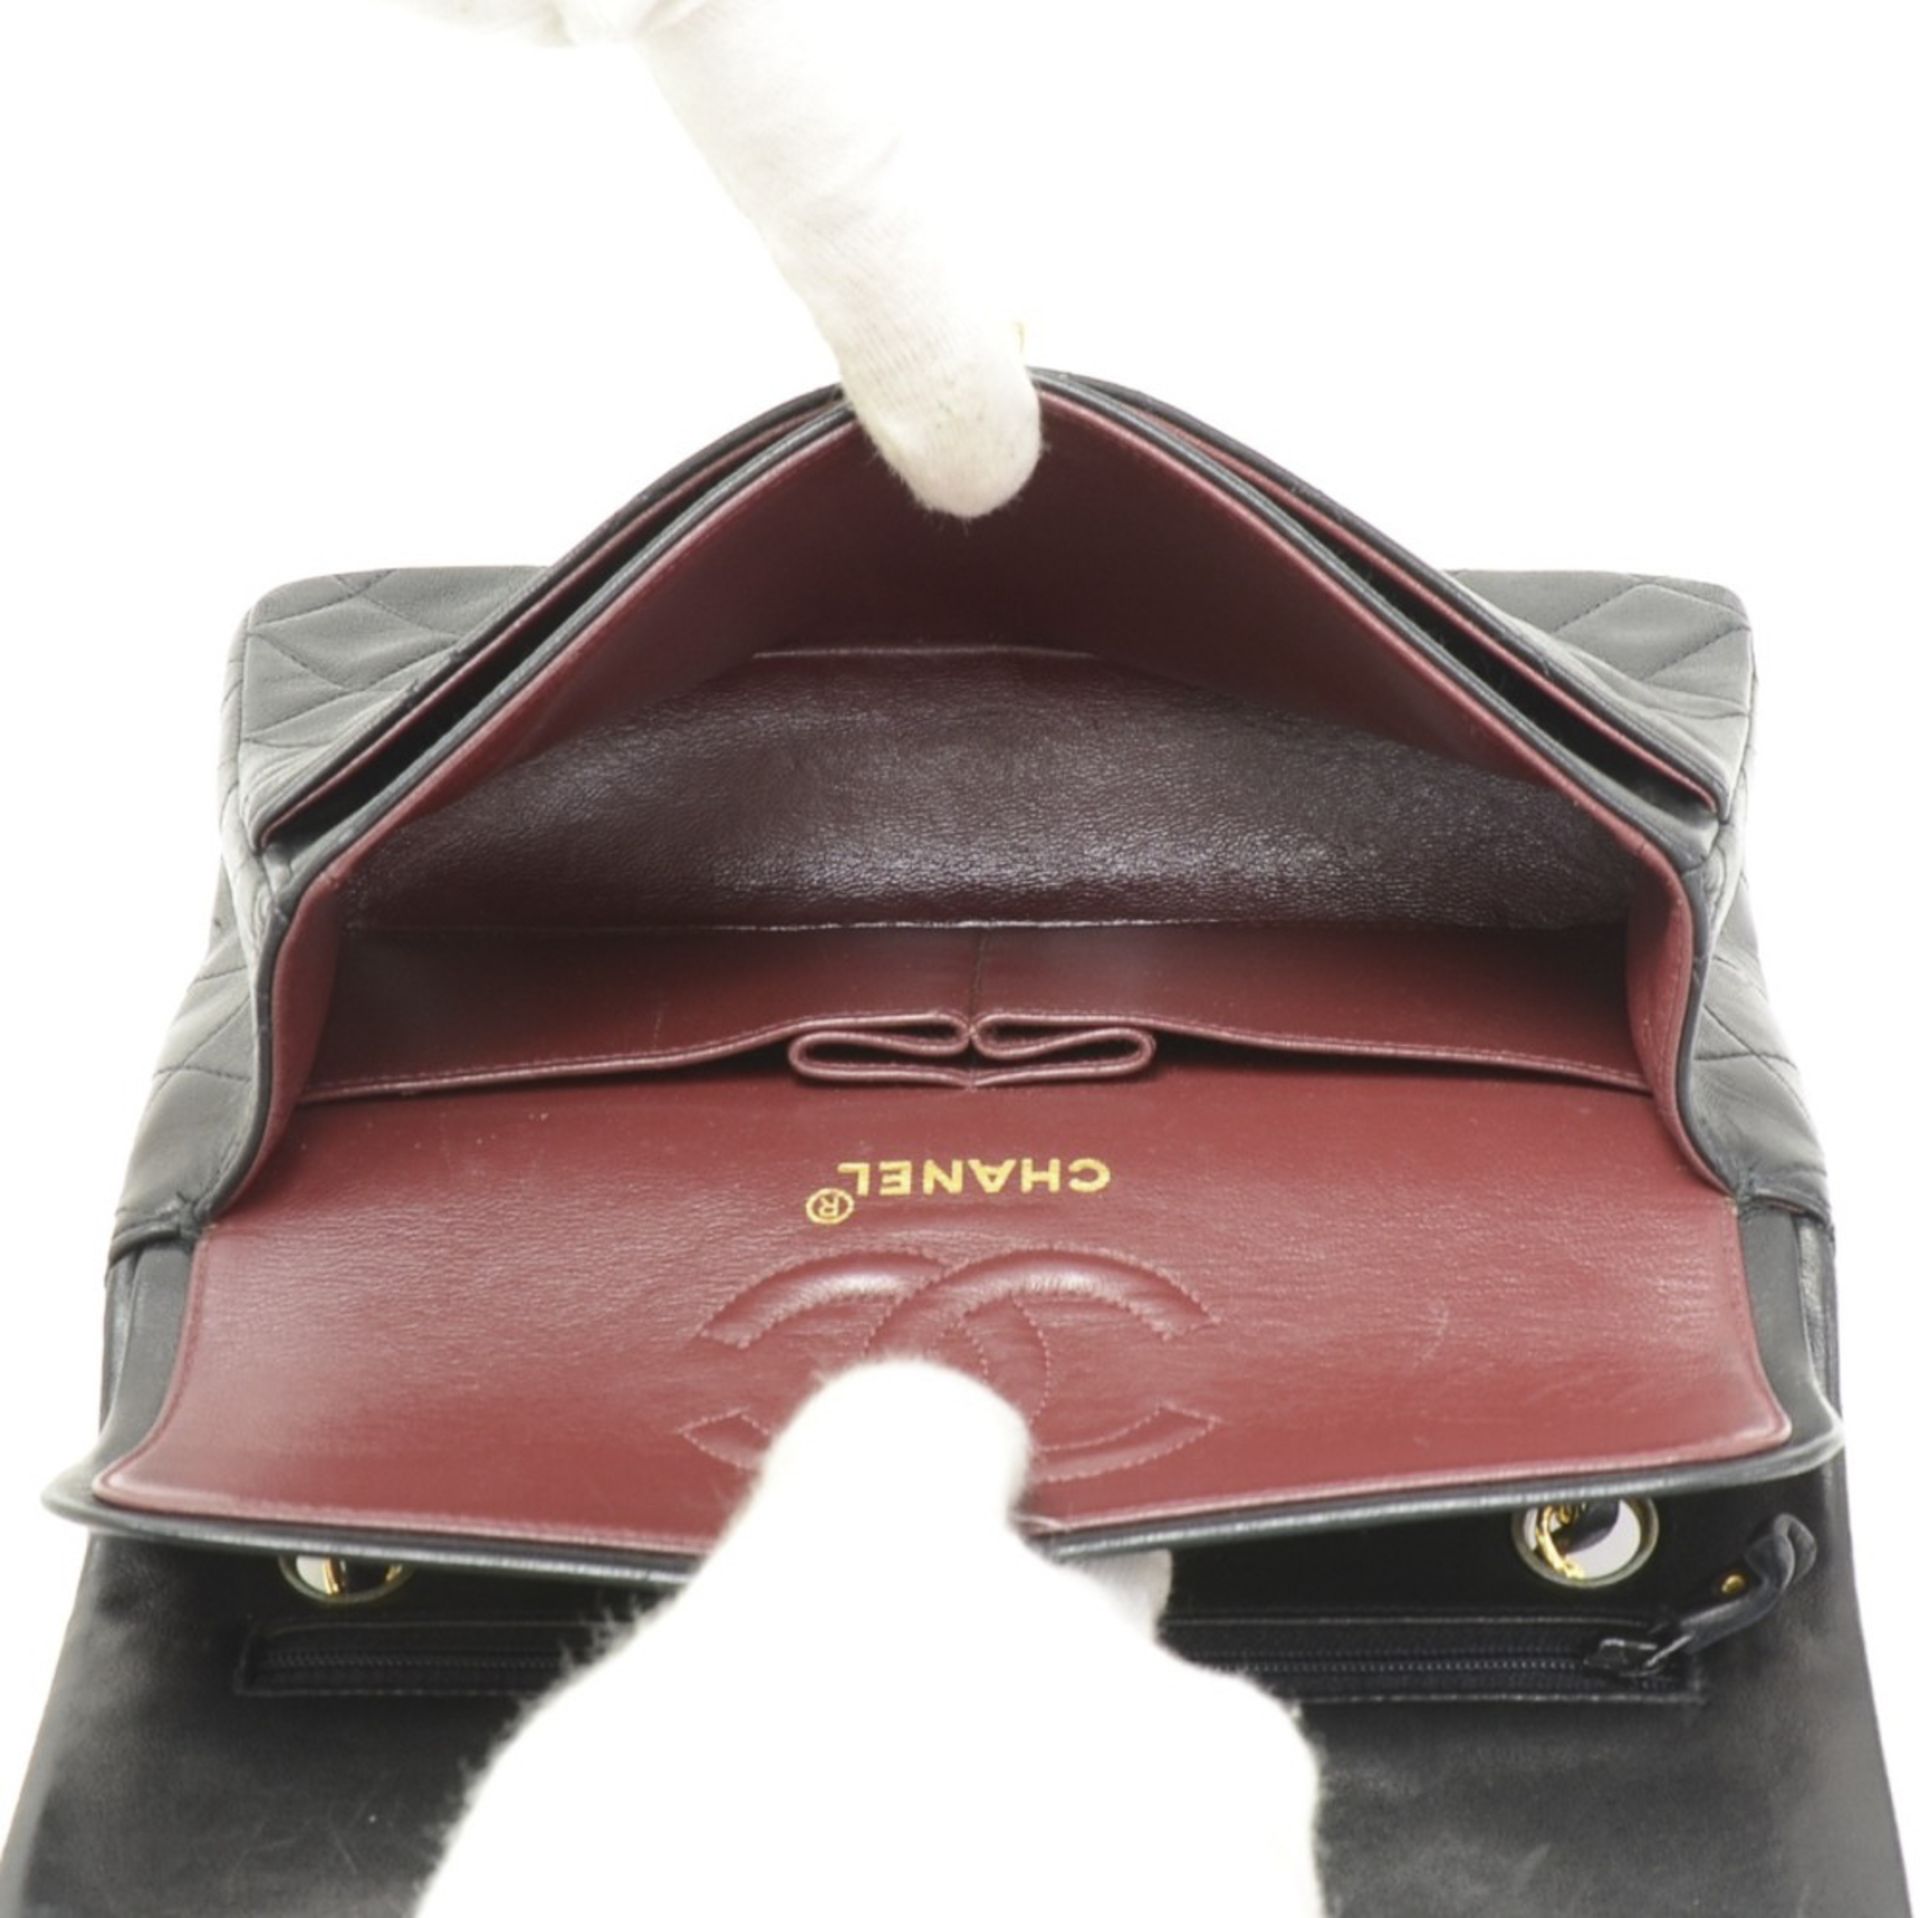 Chanel, Small Classic Double Flap Bag - Image 9 of 10